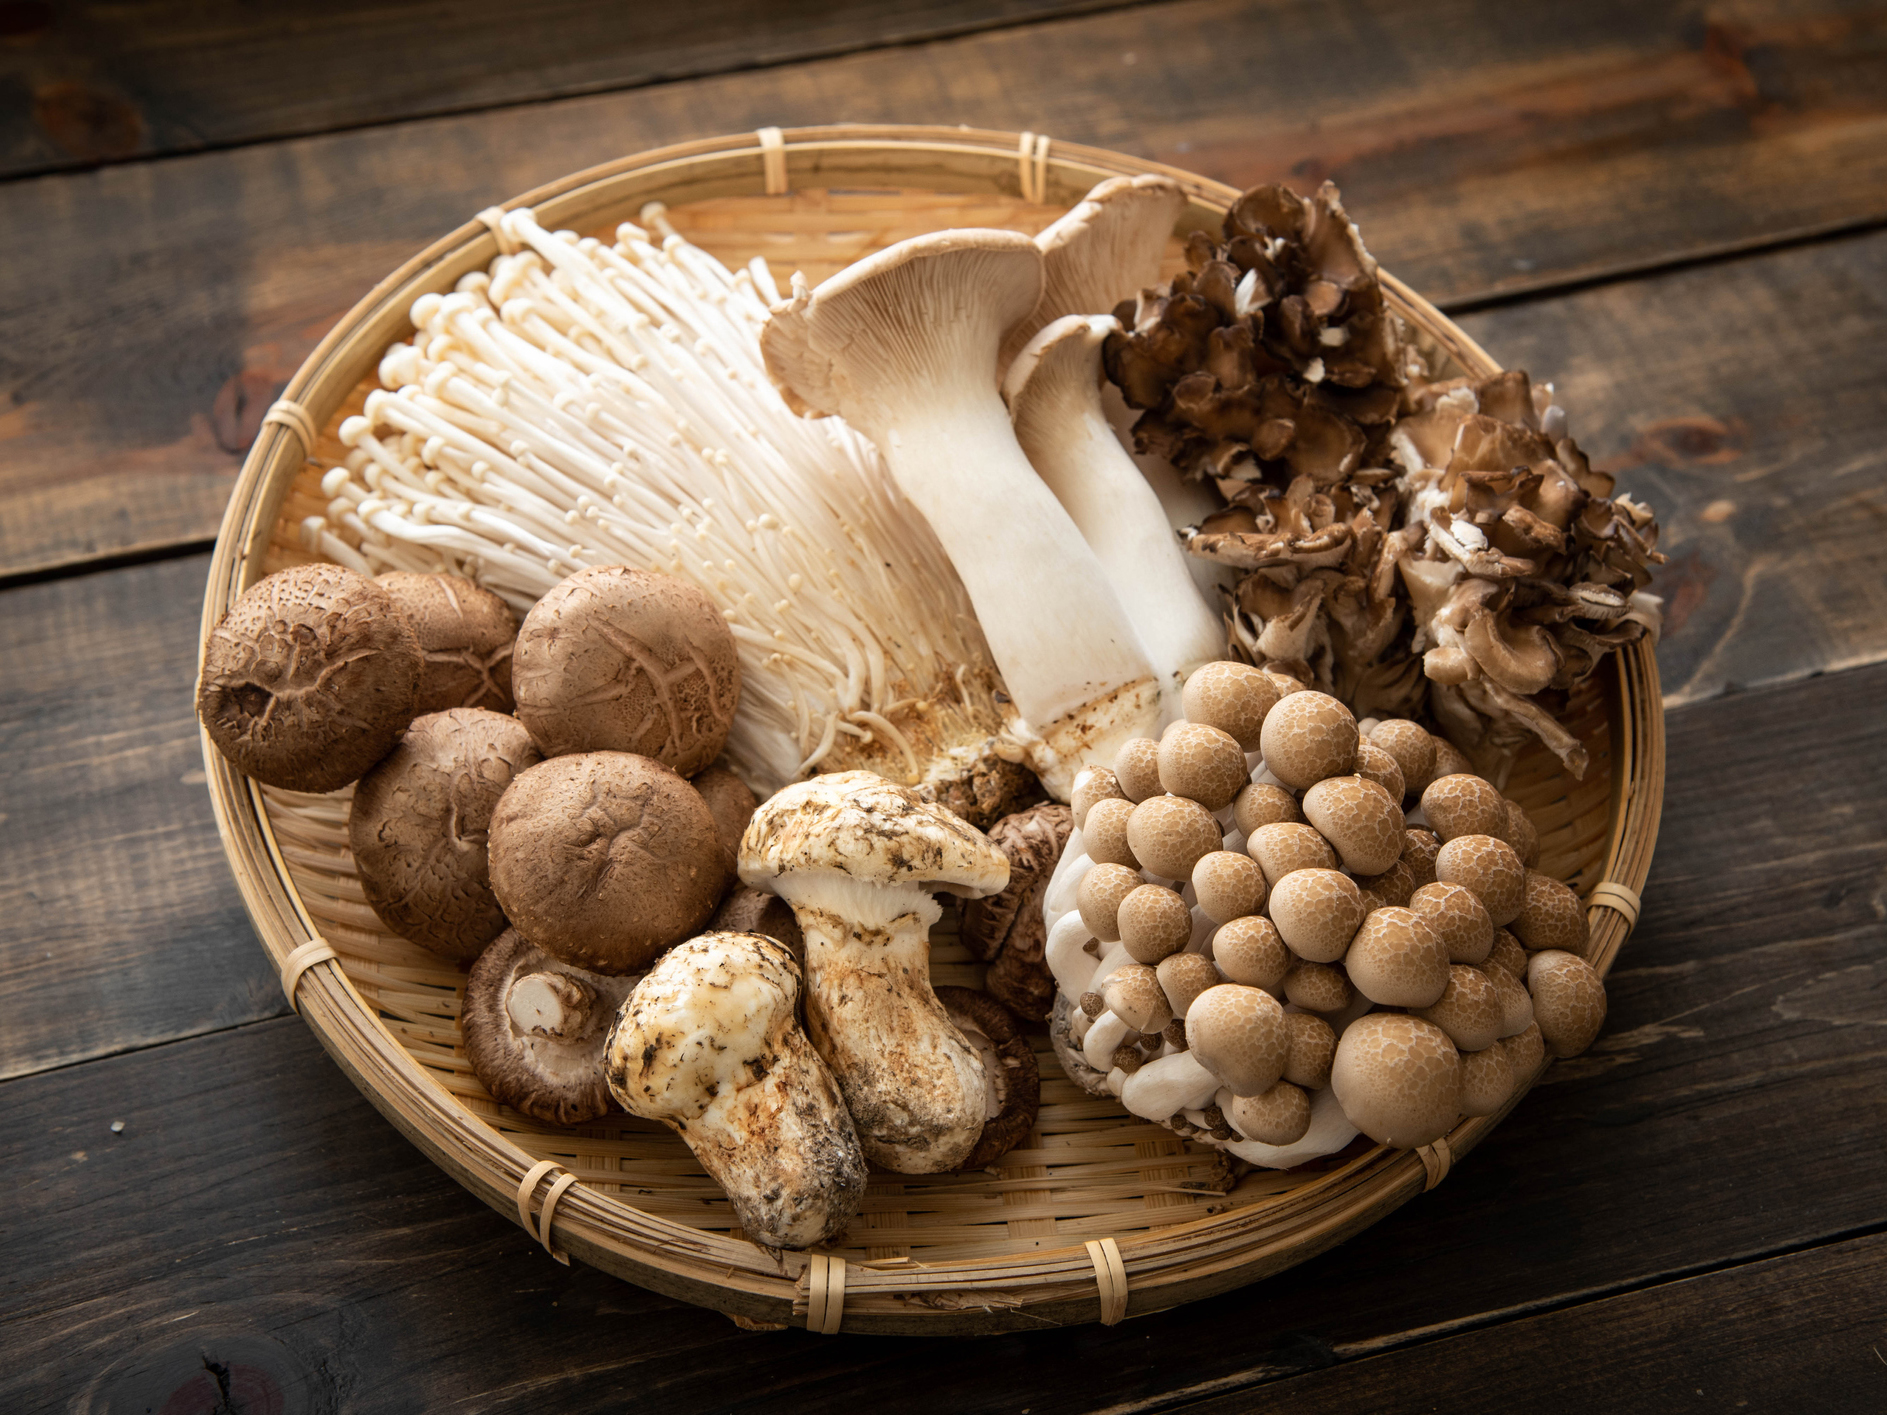 Mushrooms can help you conquer cognitive decline even if you don’t like them